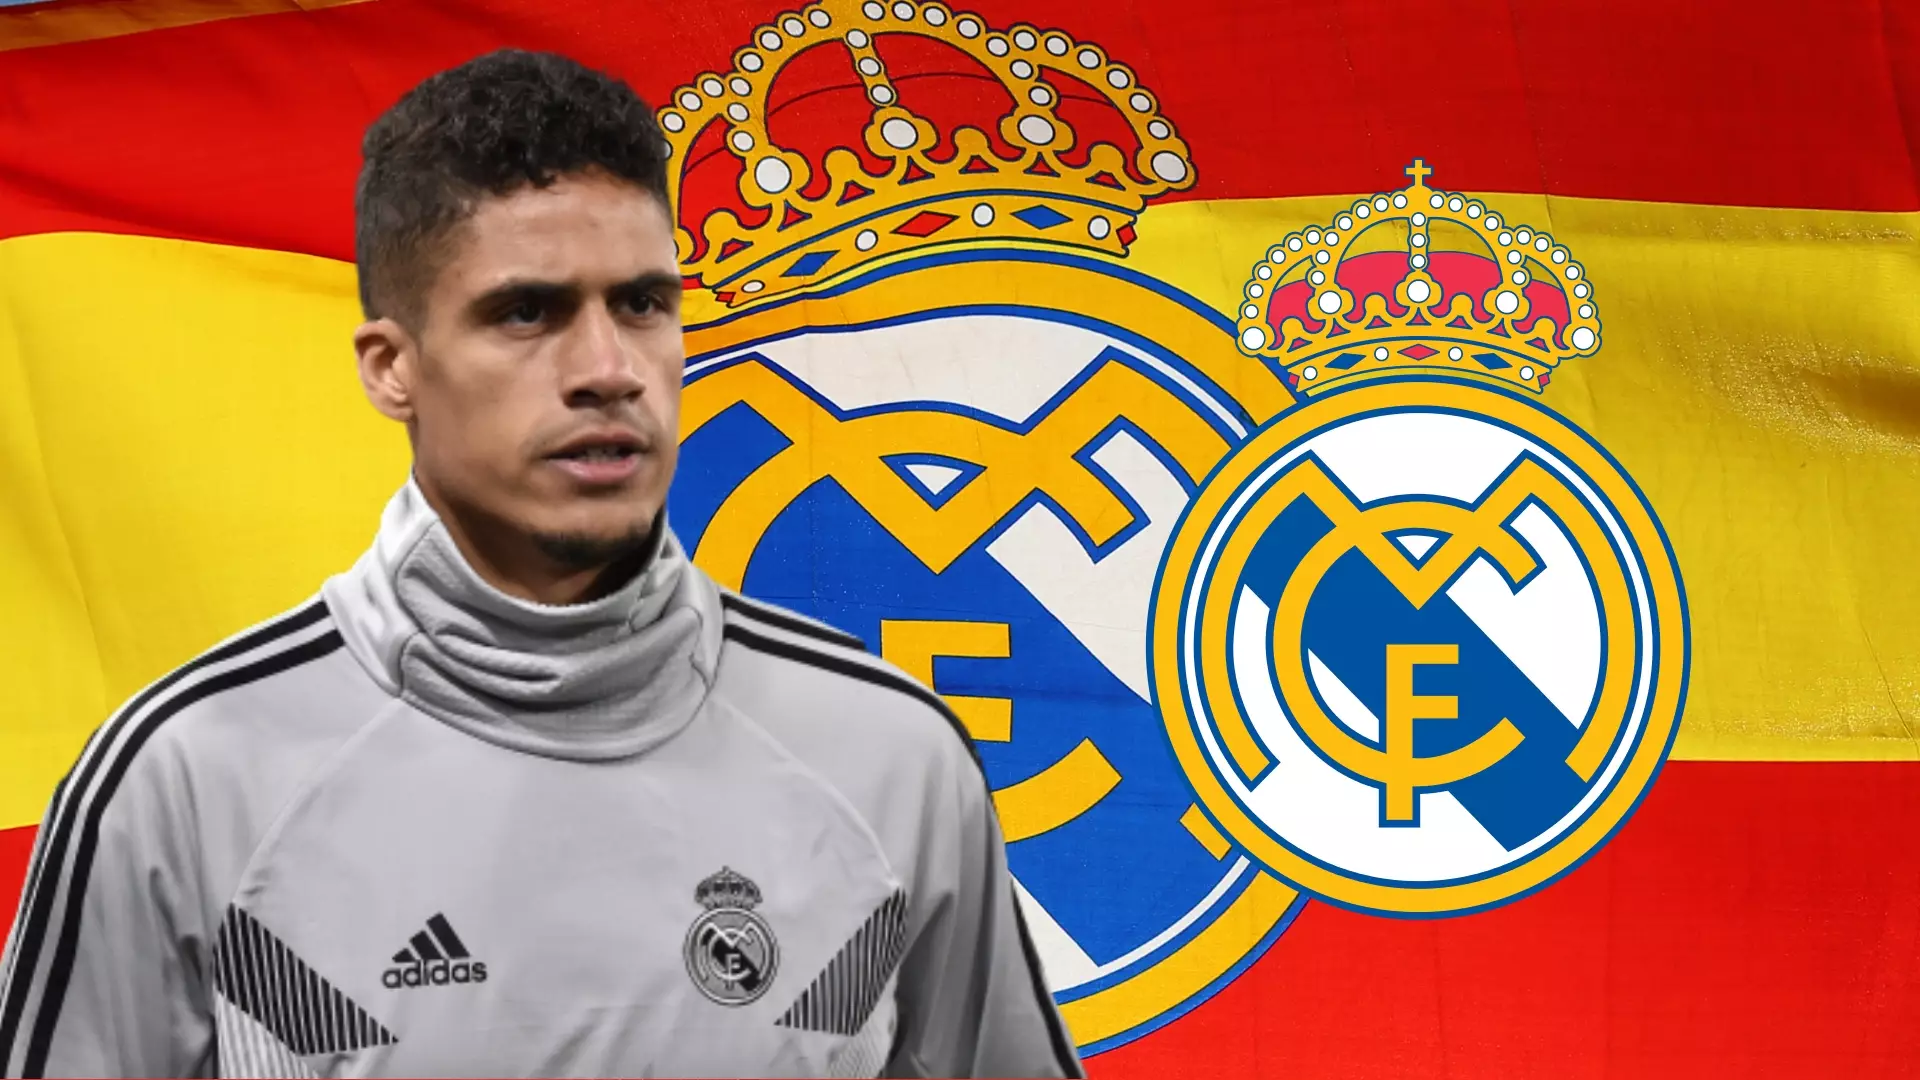 Real Madrid Will Only Allow Raphaël Varane To Leave If A Club Meets His Outrageous Price Tag